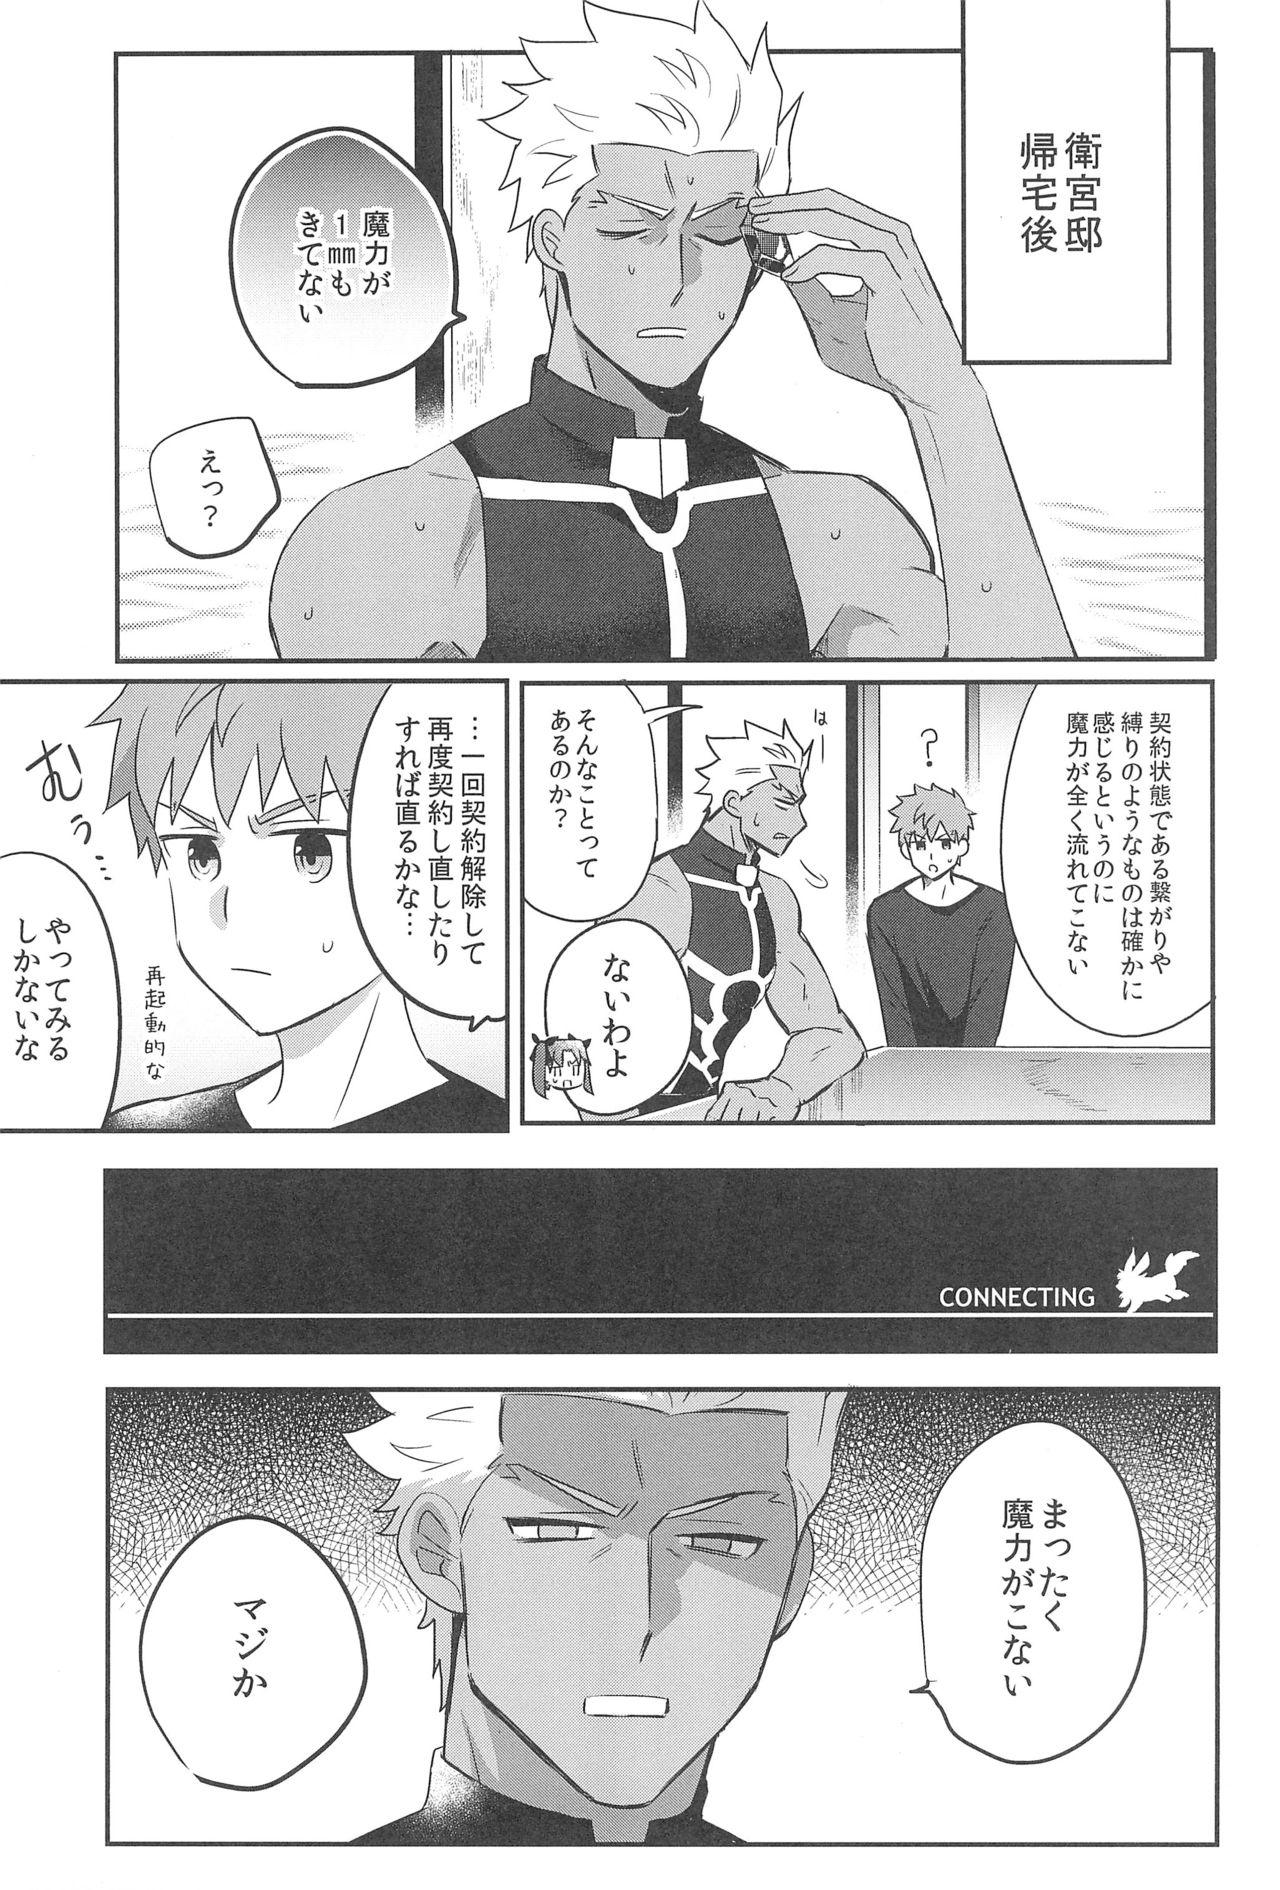 Gostosas Honban NG! - Fate stay night Dyke - Page 5